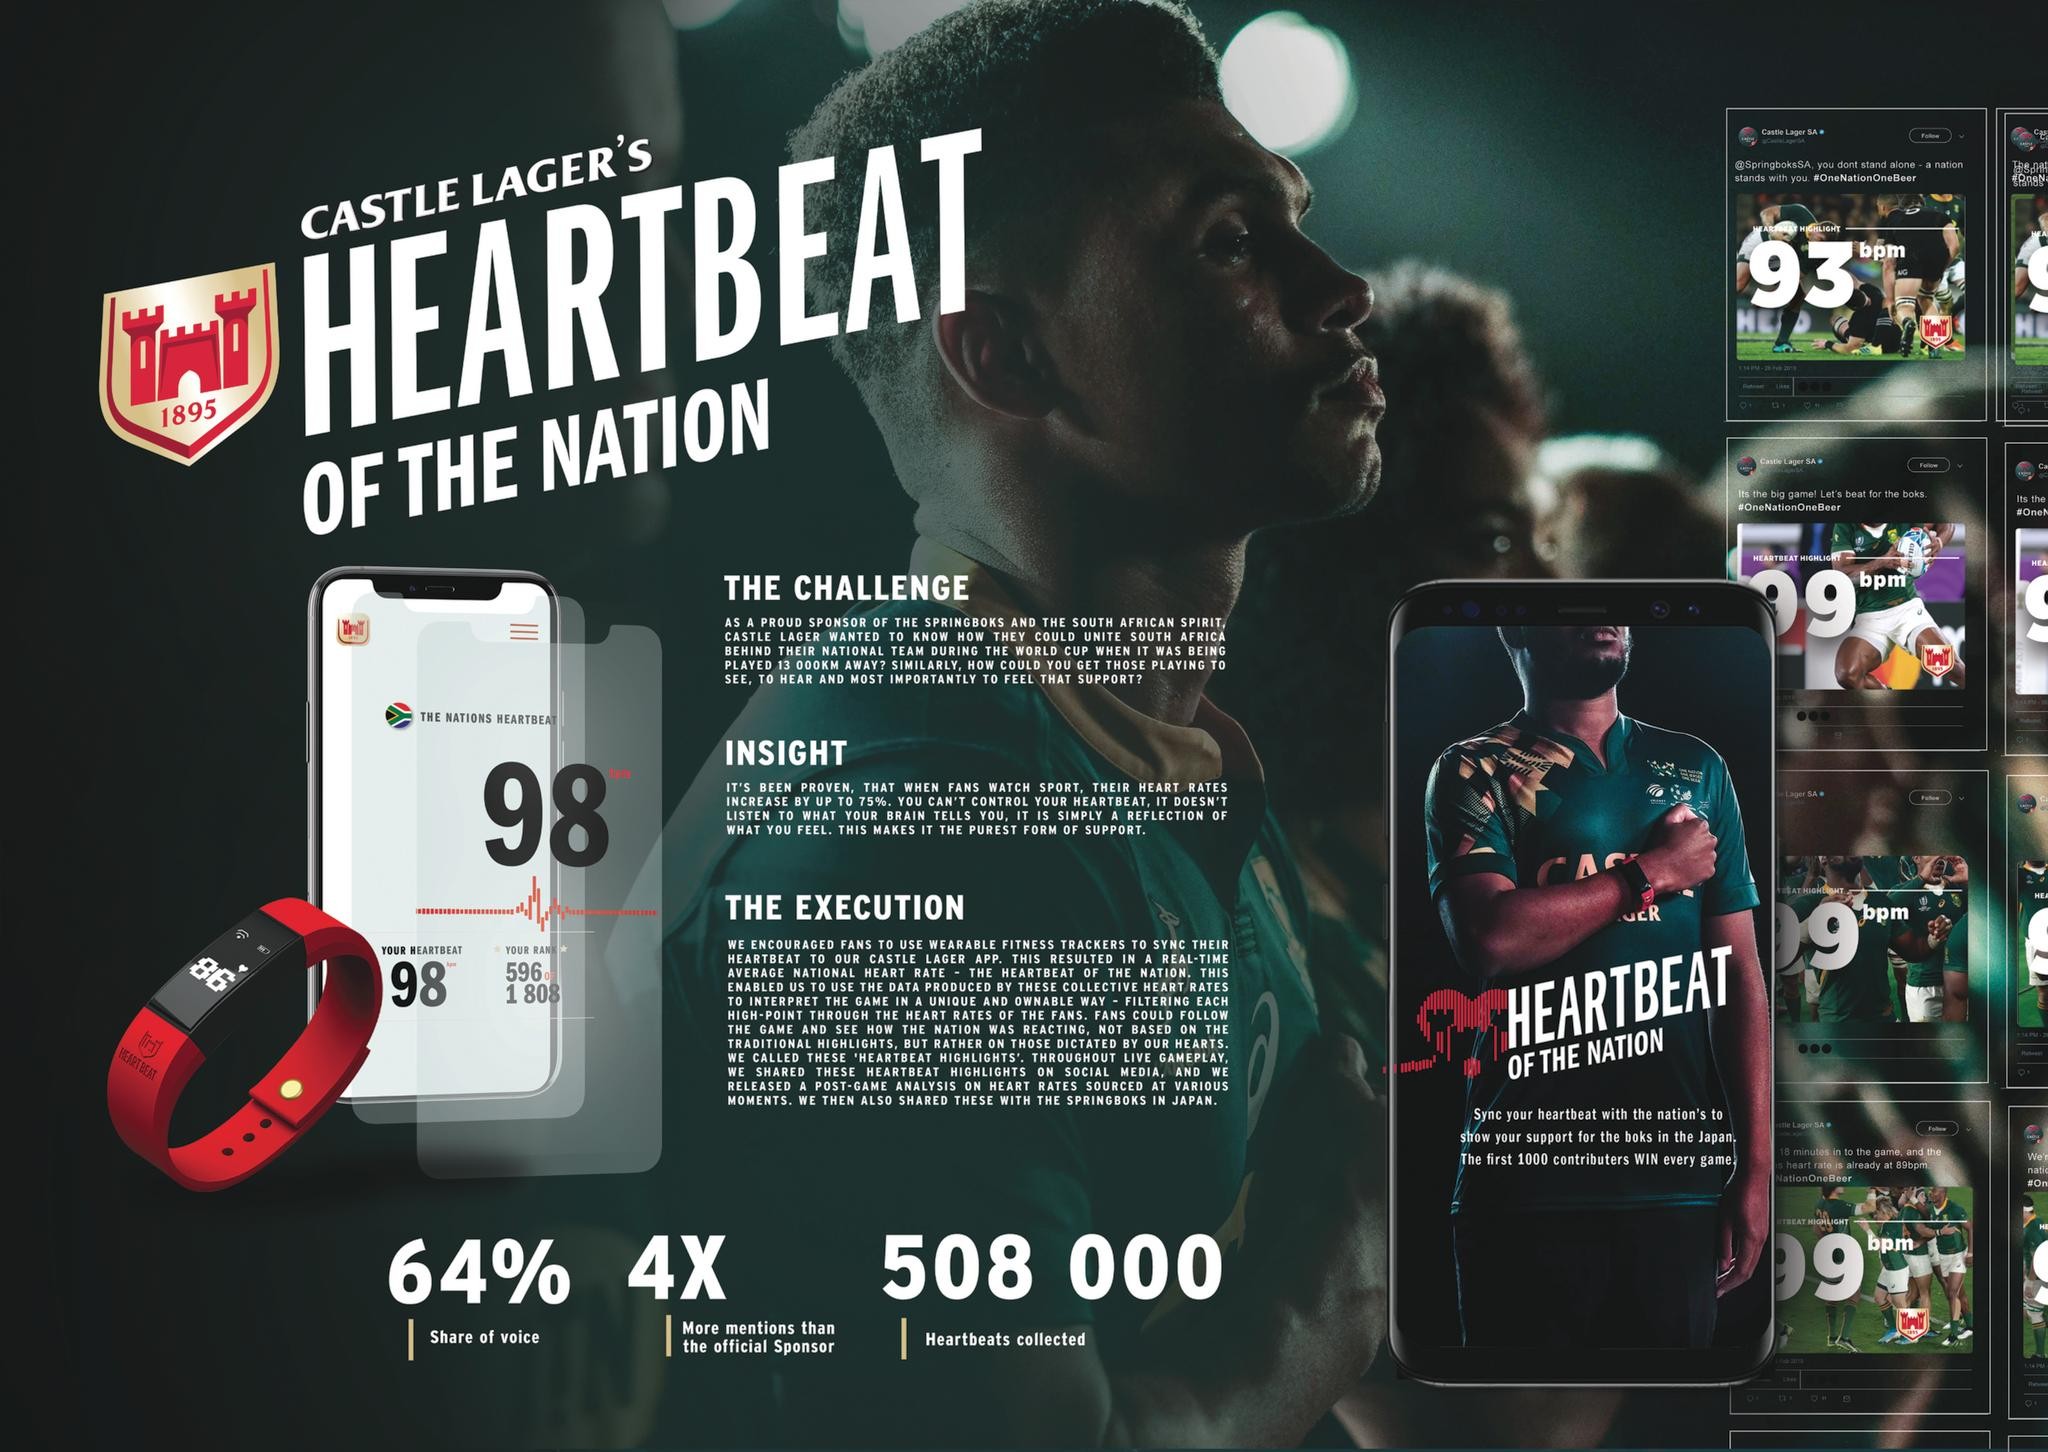 Heartbeat of the Nation